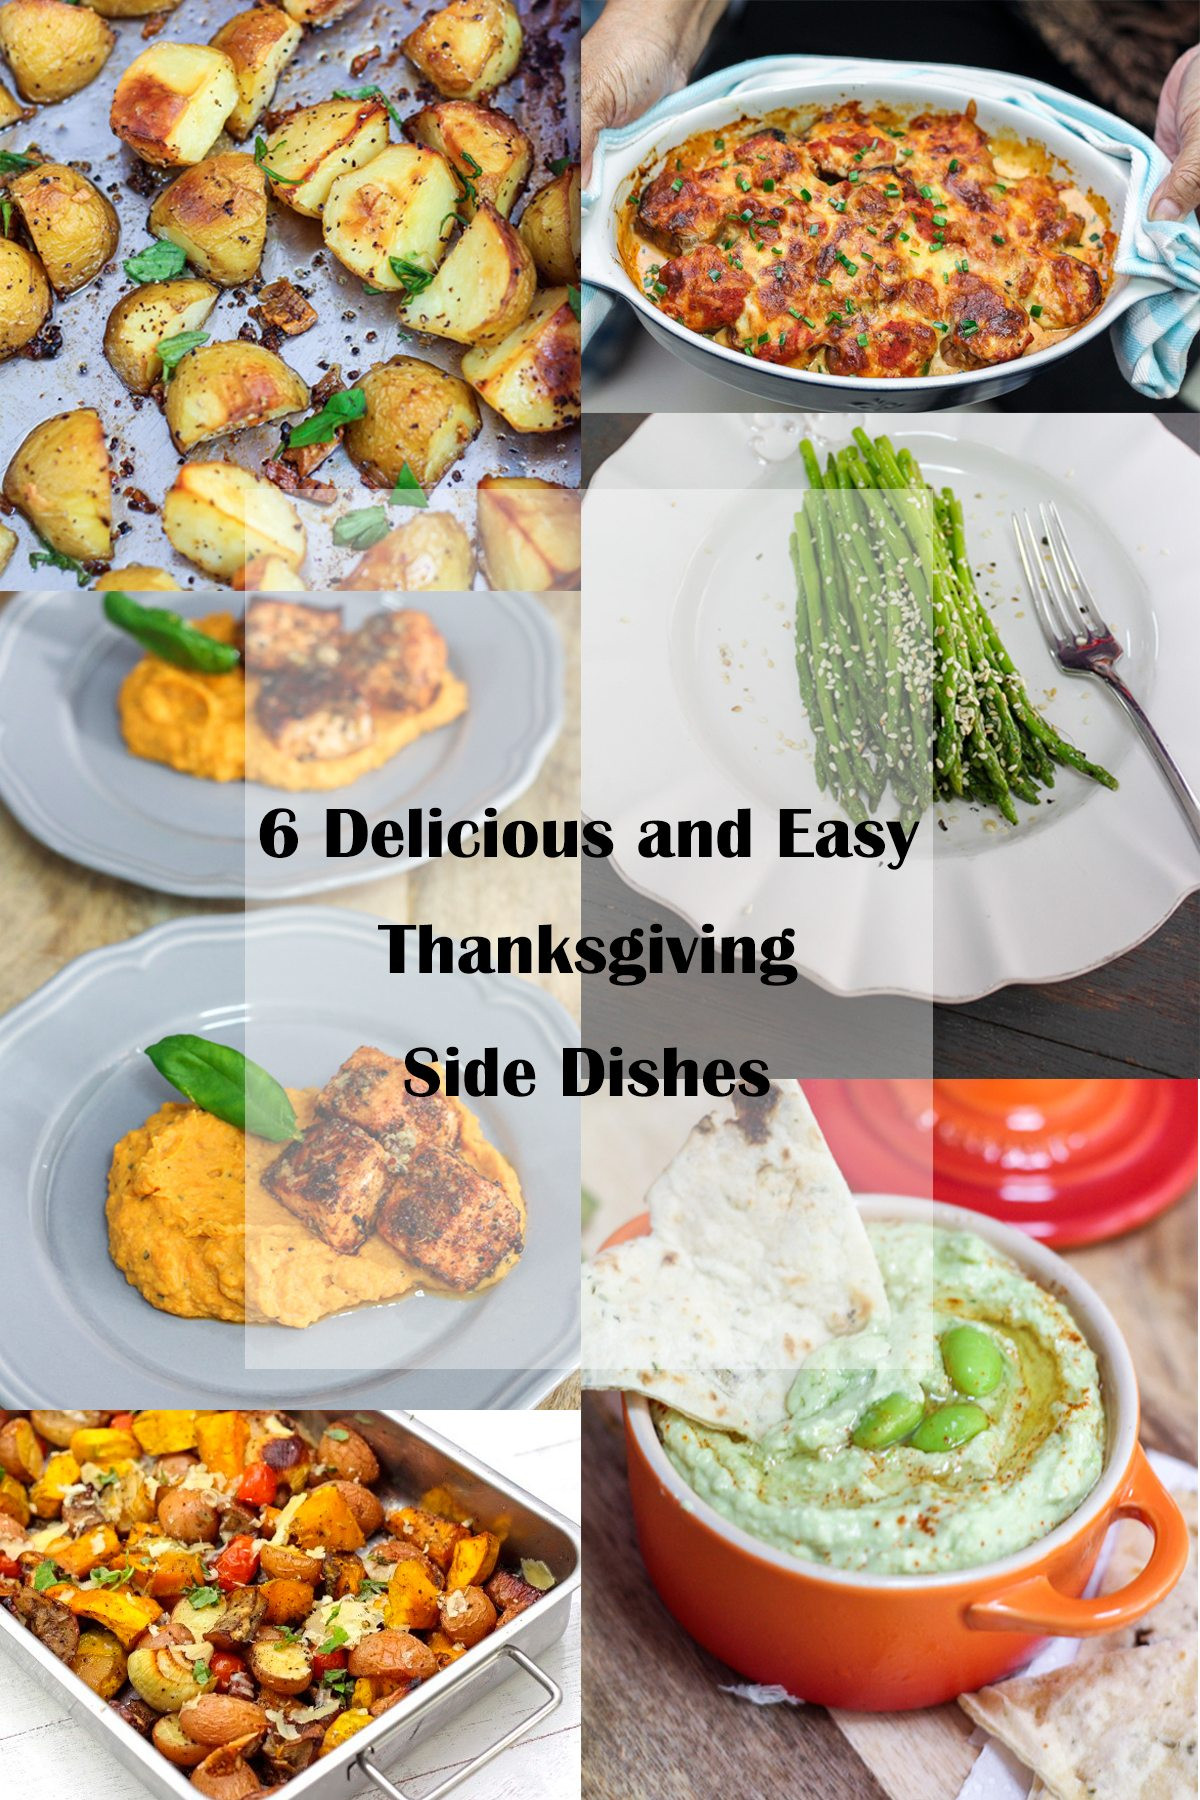 Easy Side Dishes For Thanksgiving Meal
 6 Delicious and Easy Thanksgiving Side Dishes